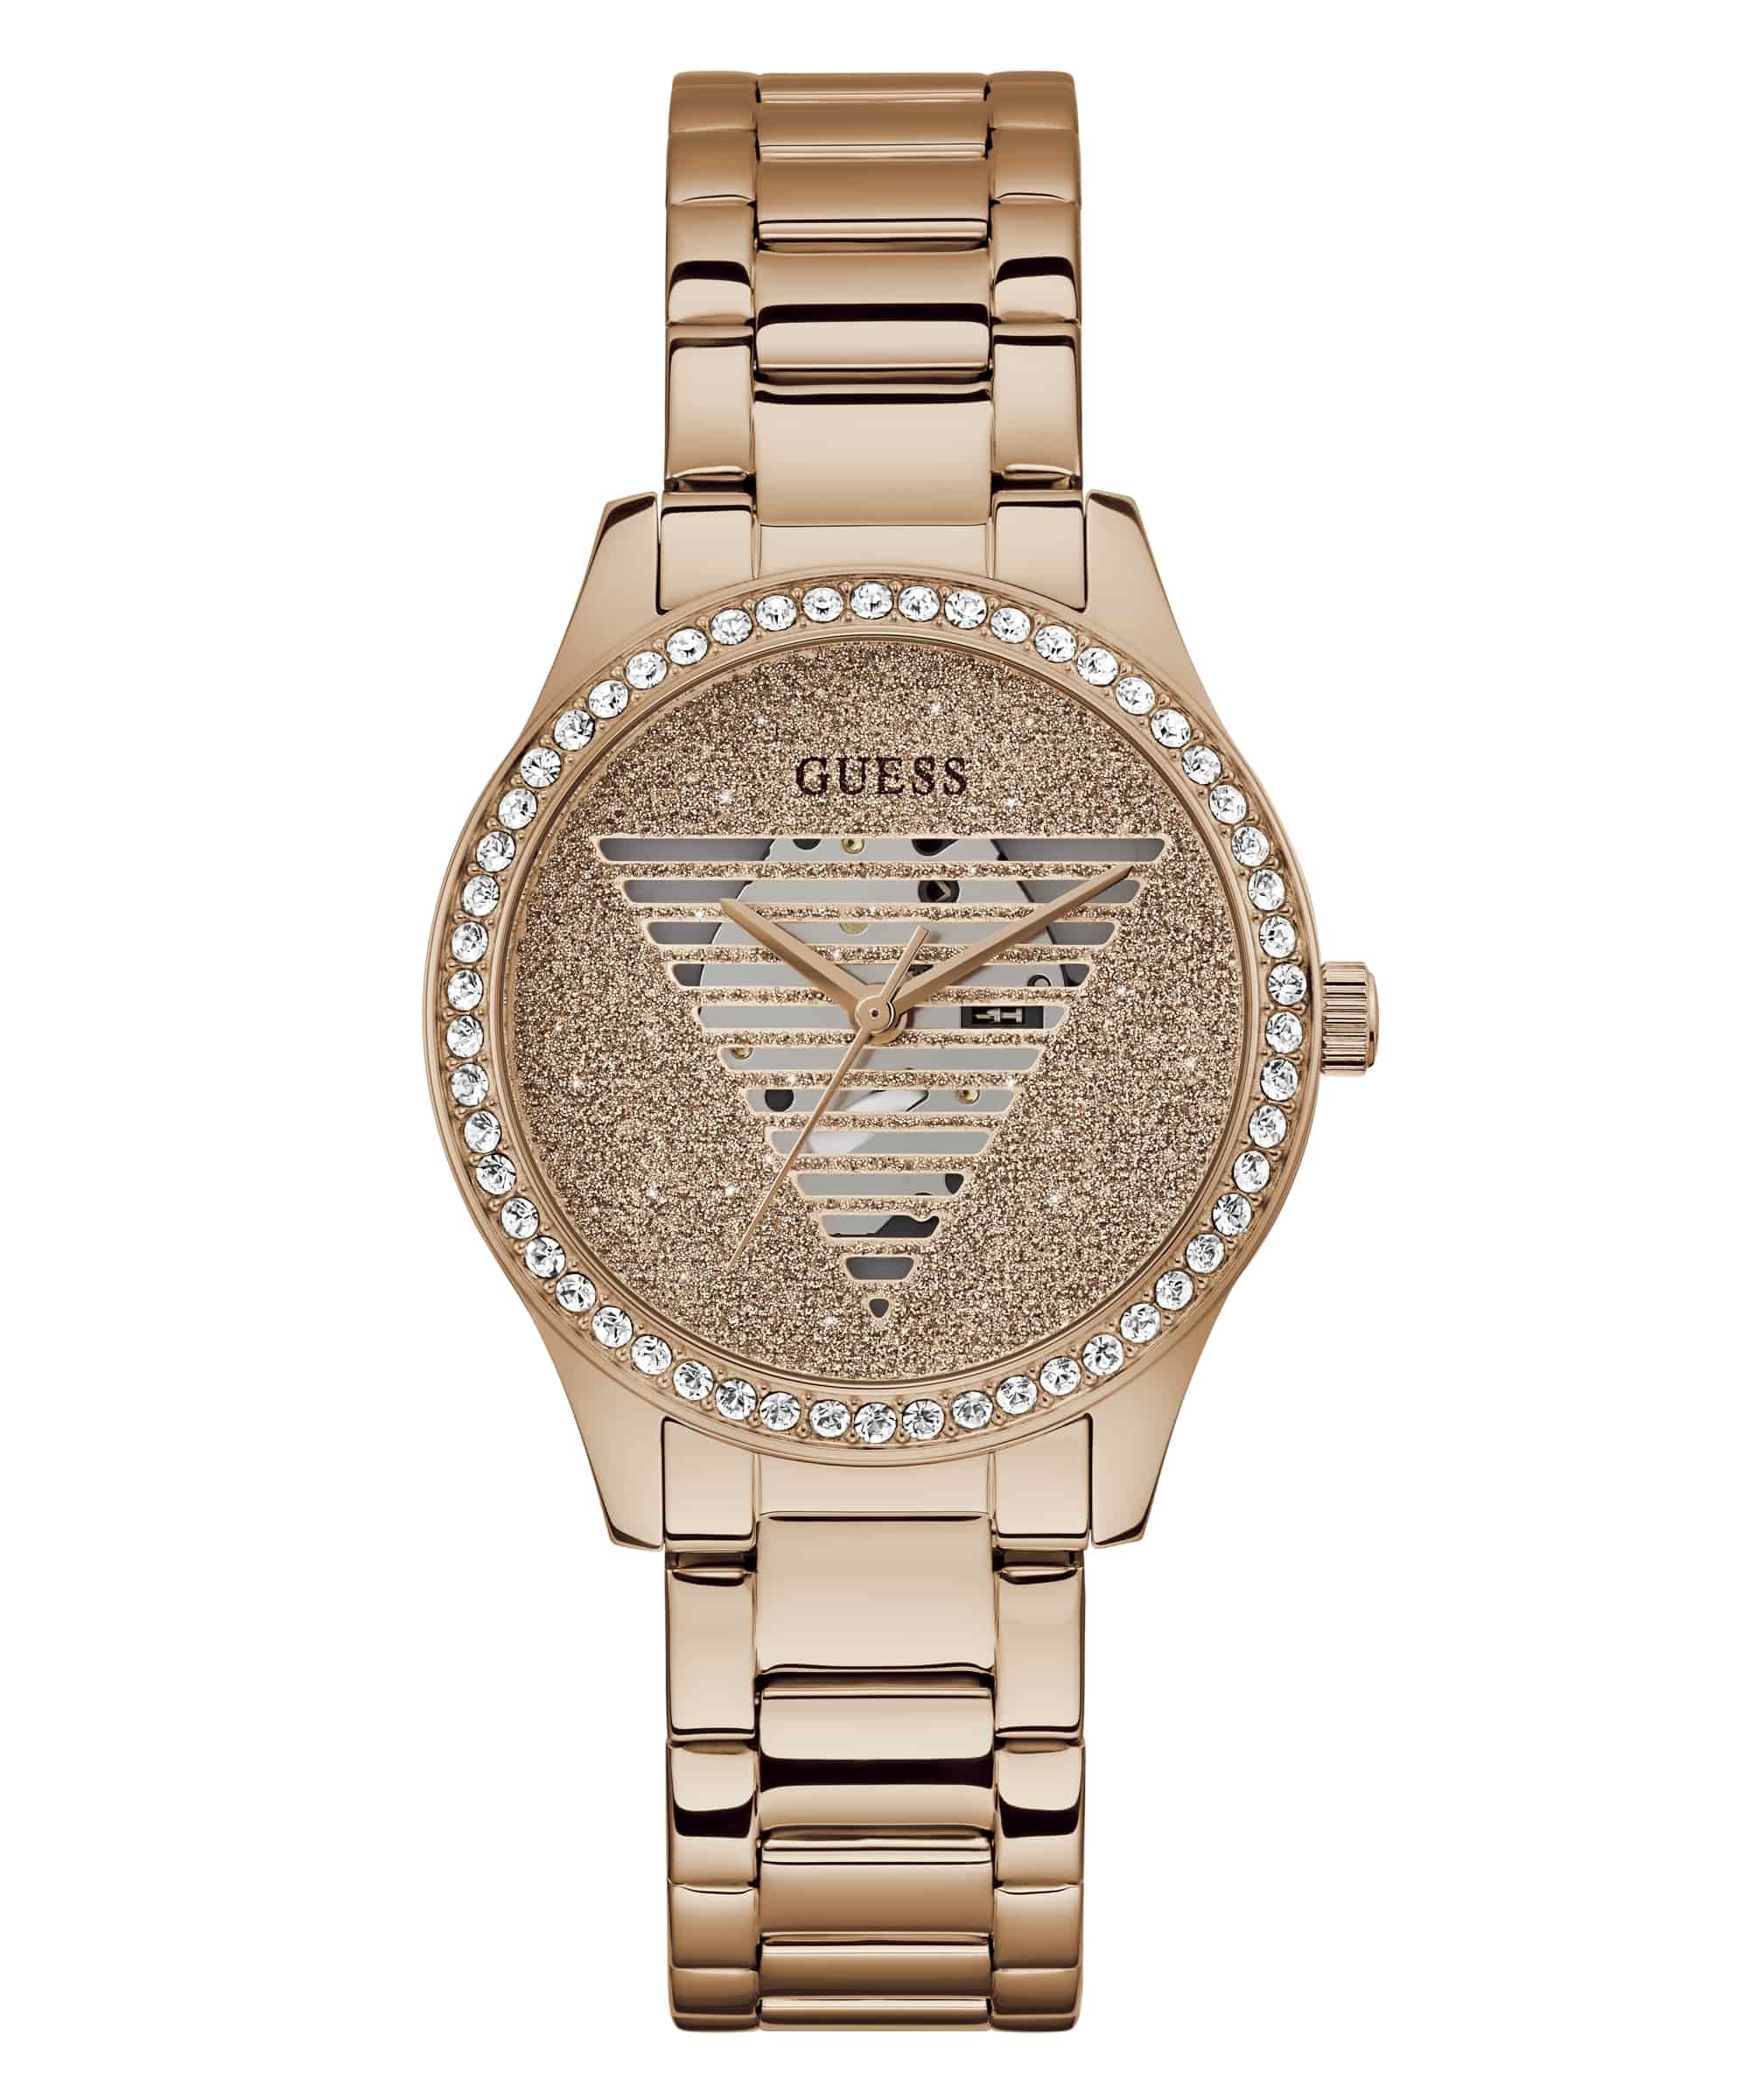 Guess Round Watch - Men's Watches in Gold | Buckle